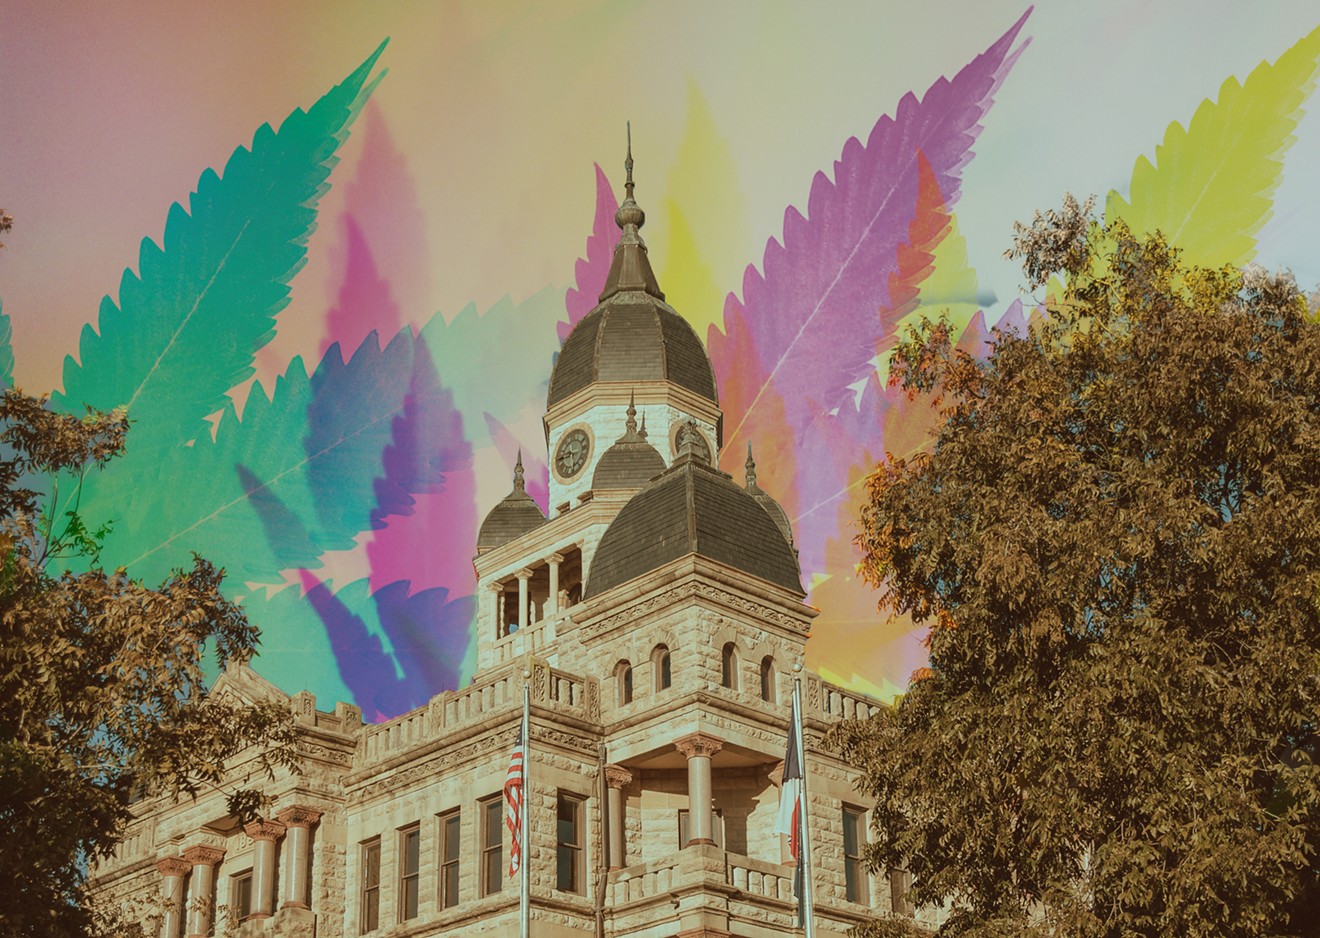 Denton passed a proposition to decriminalize pot that will not be honored as legal by the city leaders or police.